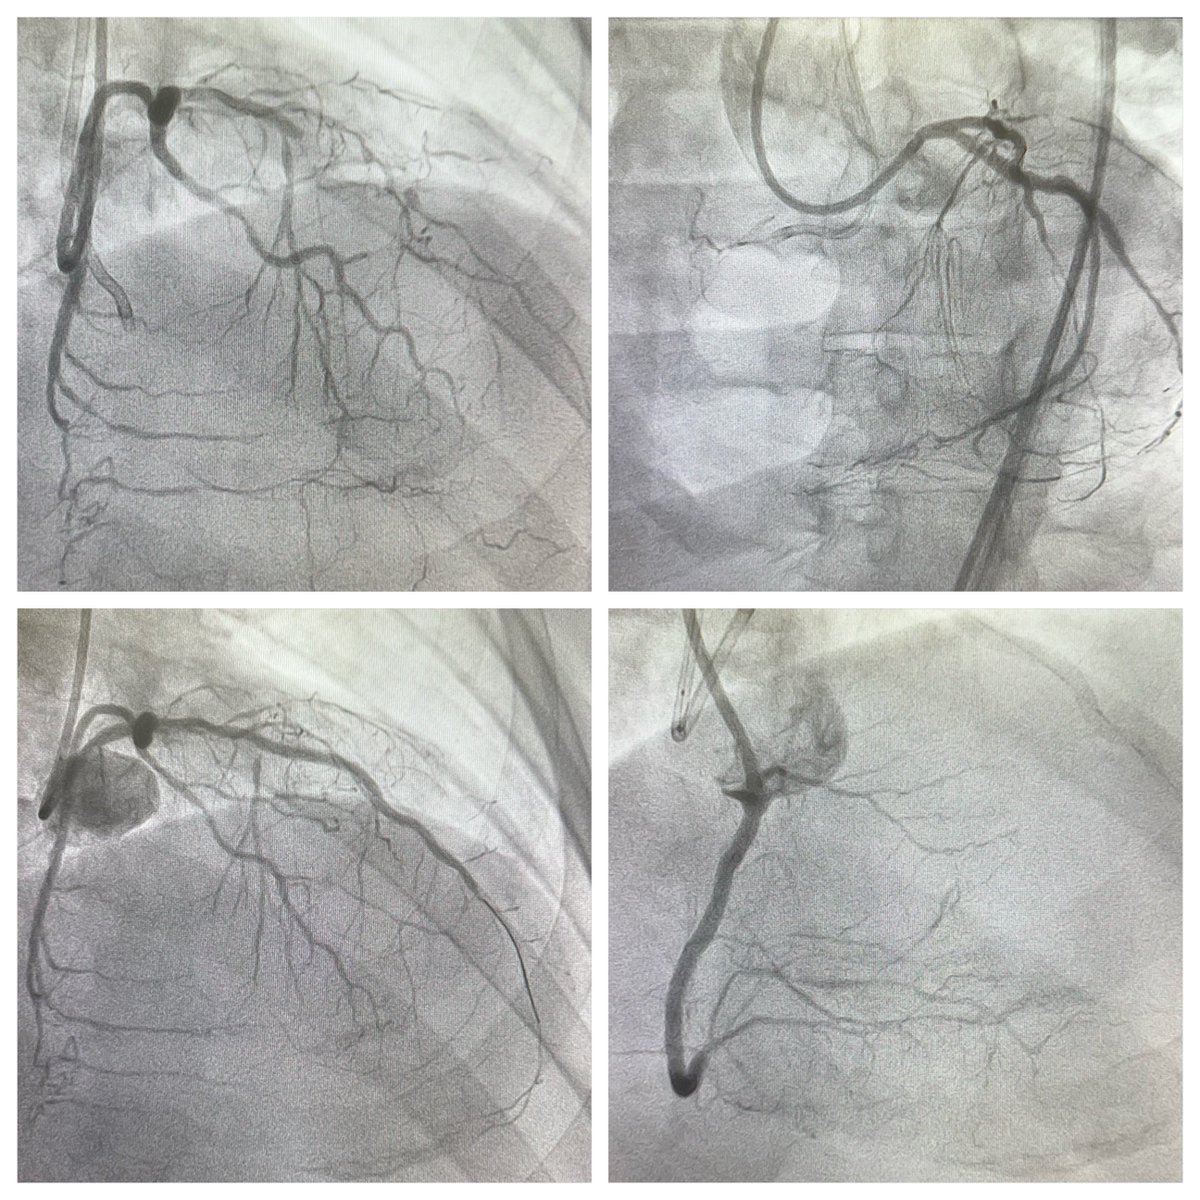 44👨🏻‍🦰, ischemic CMP. LCx STEMI w/ CS in September/23 on top of RCA/LAD CTOs. EF 30s. LAD was recanalized during LCx PPCI. LAD Re-occluded. Very symptomatic. Was referred for CABG but turned down unfortunately. Now LAD IS-CTO antegrade PCI & RCA CTO PCI using retrograde approach.